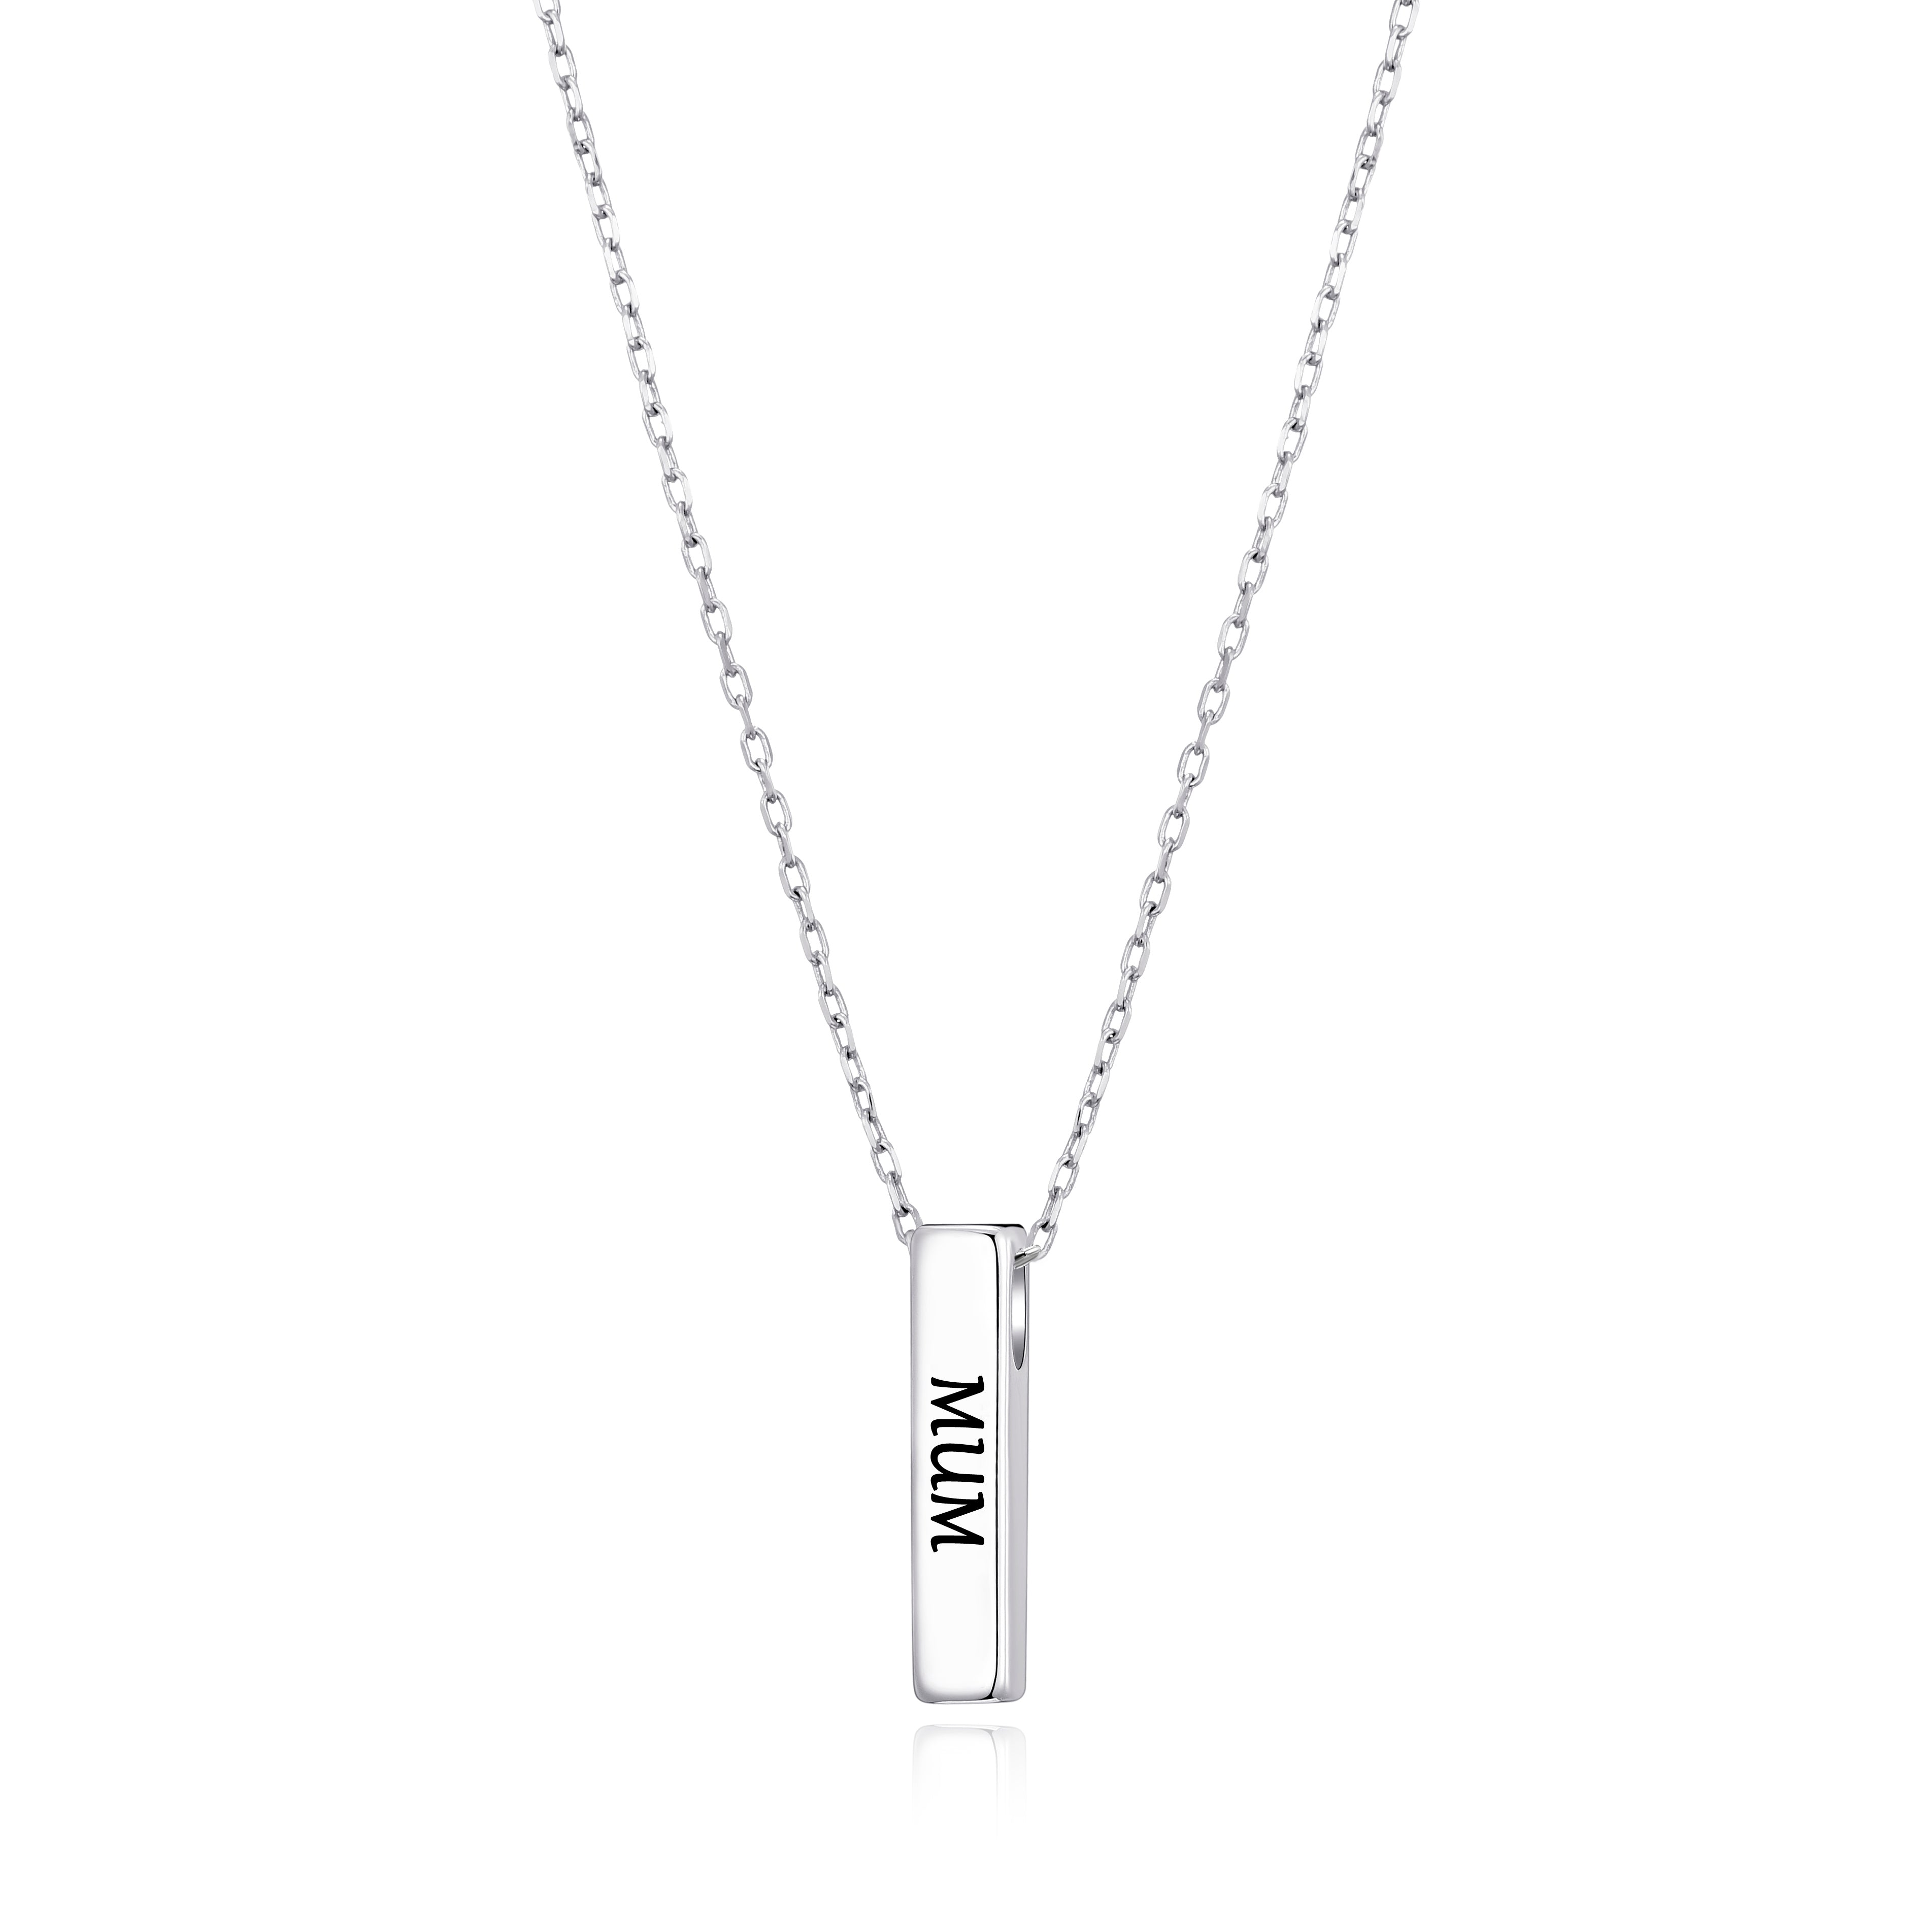 Silver Plated Mum Bar Necklace